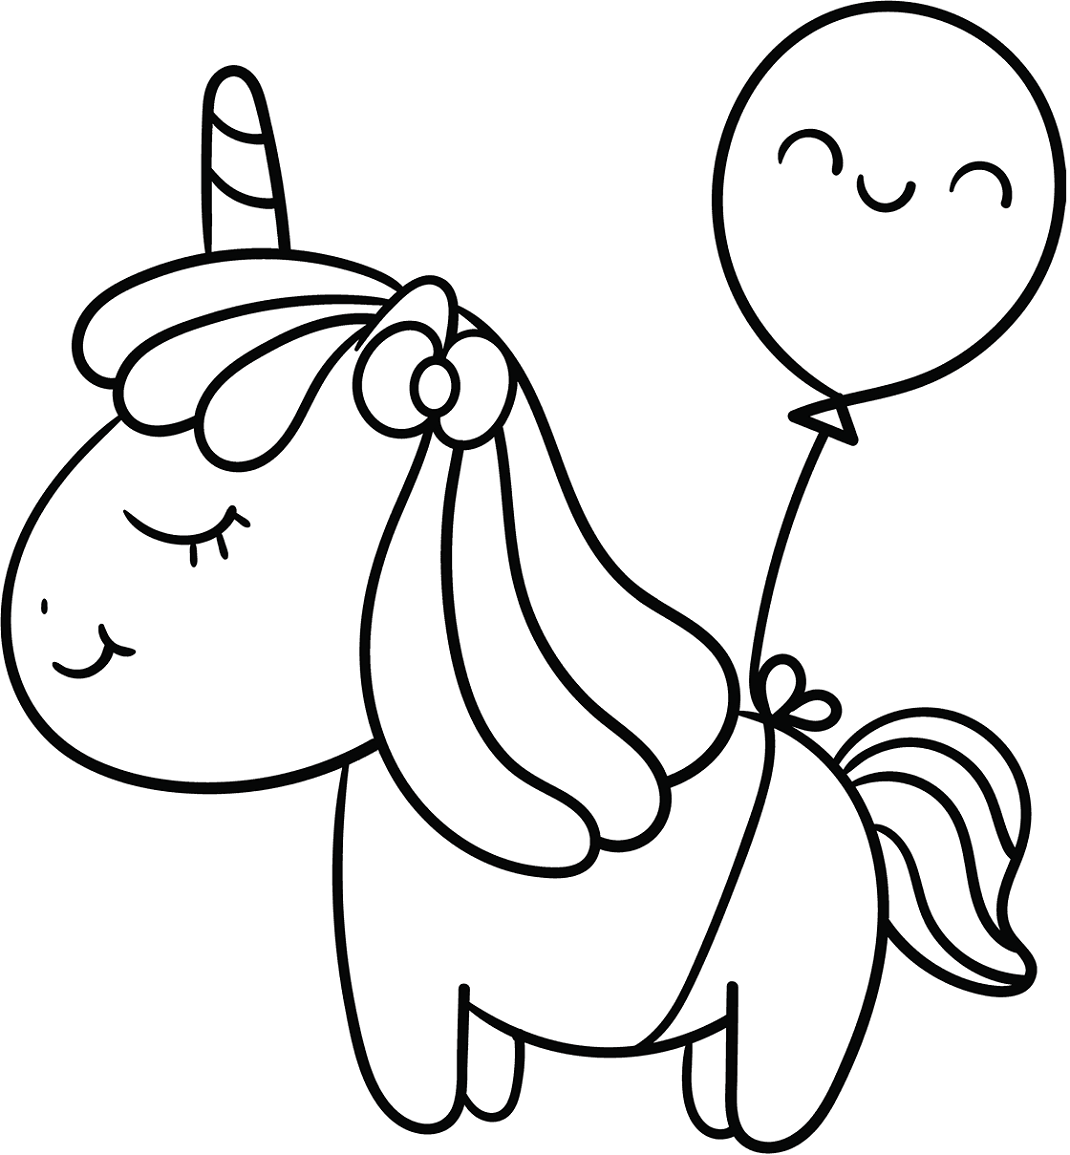 Baby Unicorn With A Balloon Coloring Page - Free Printable Coloring